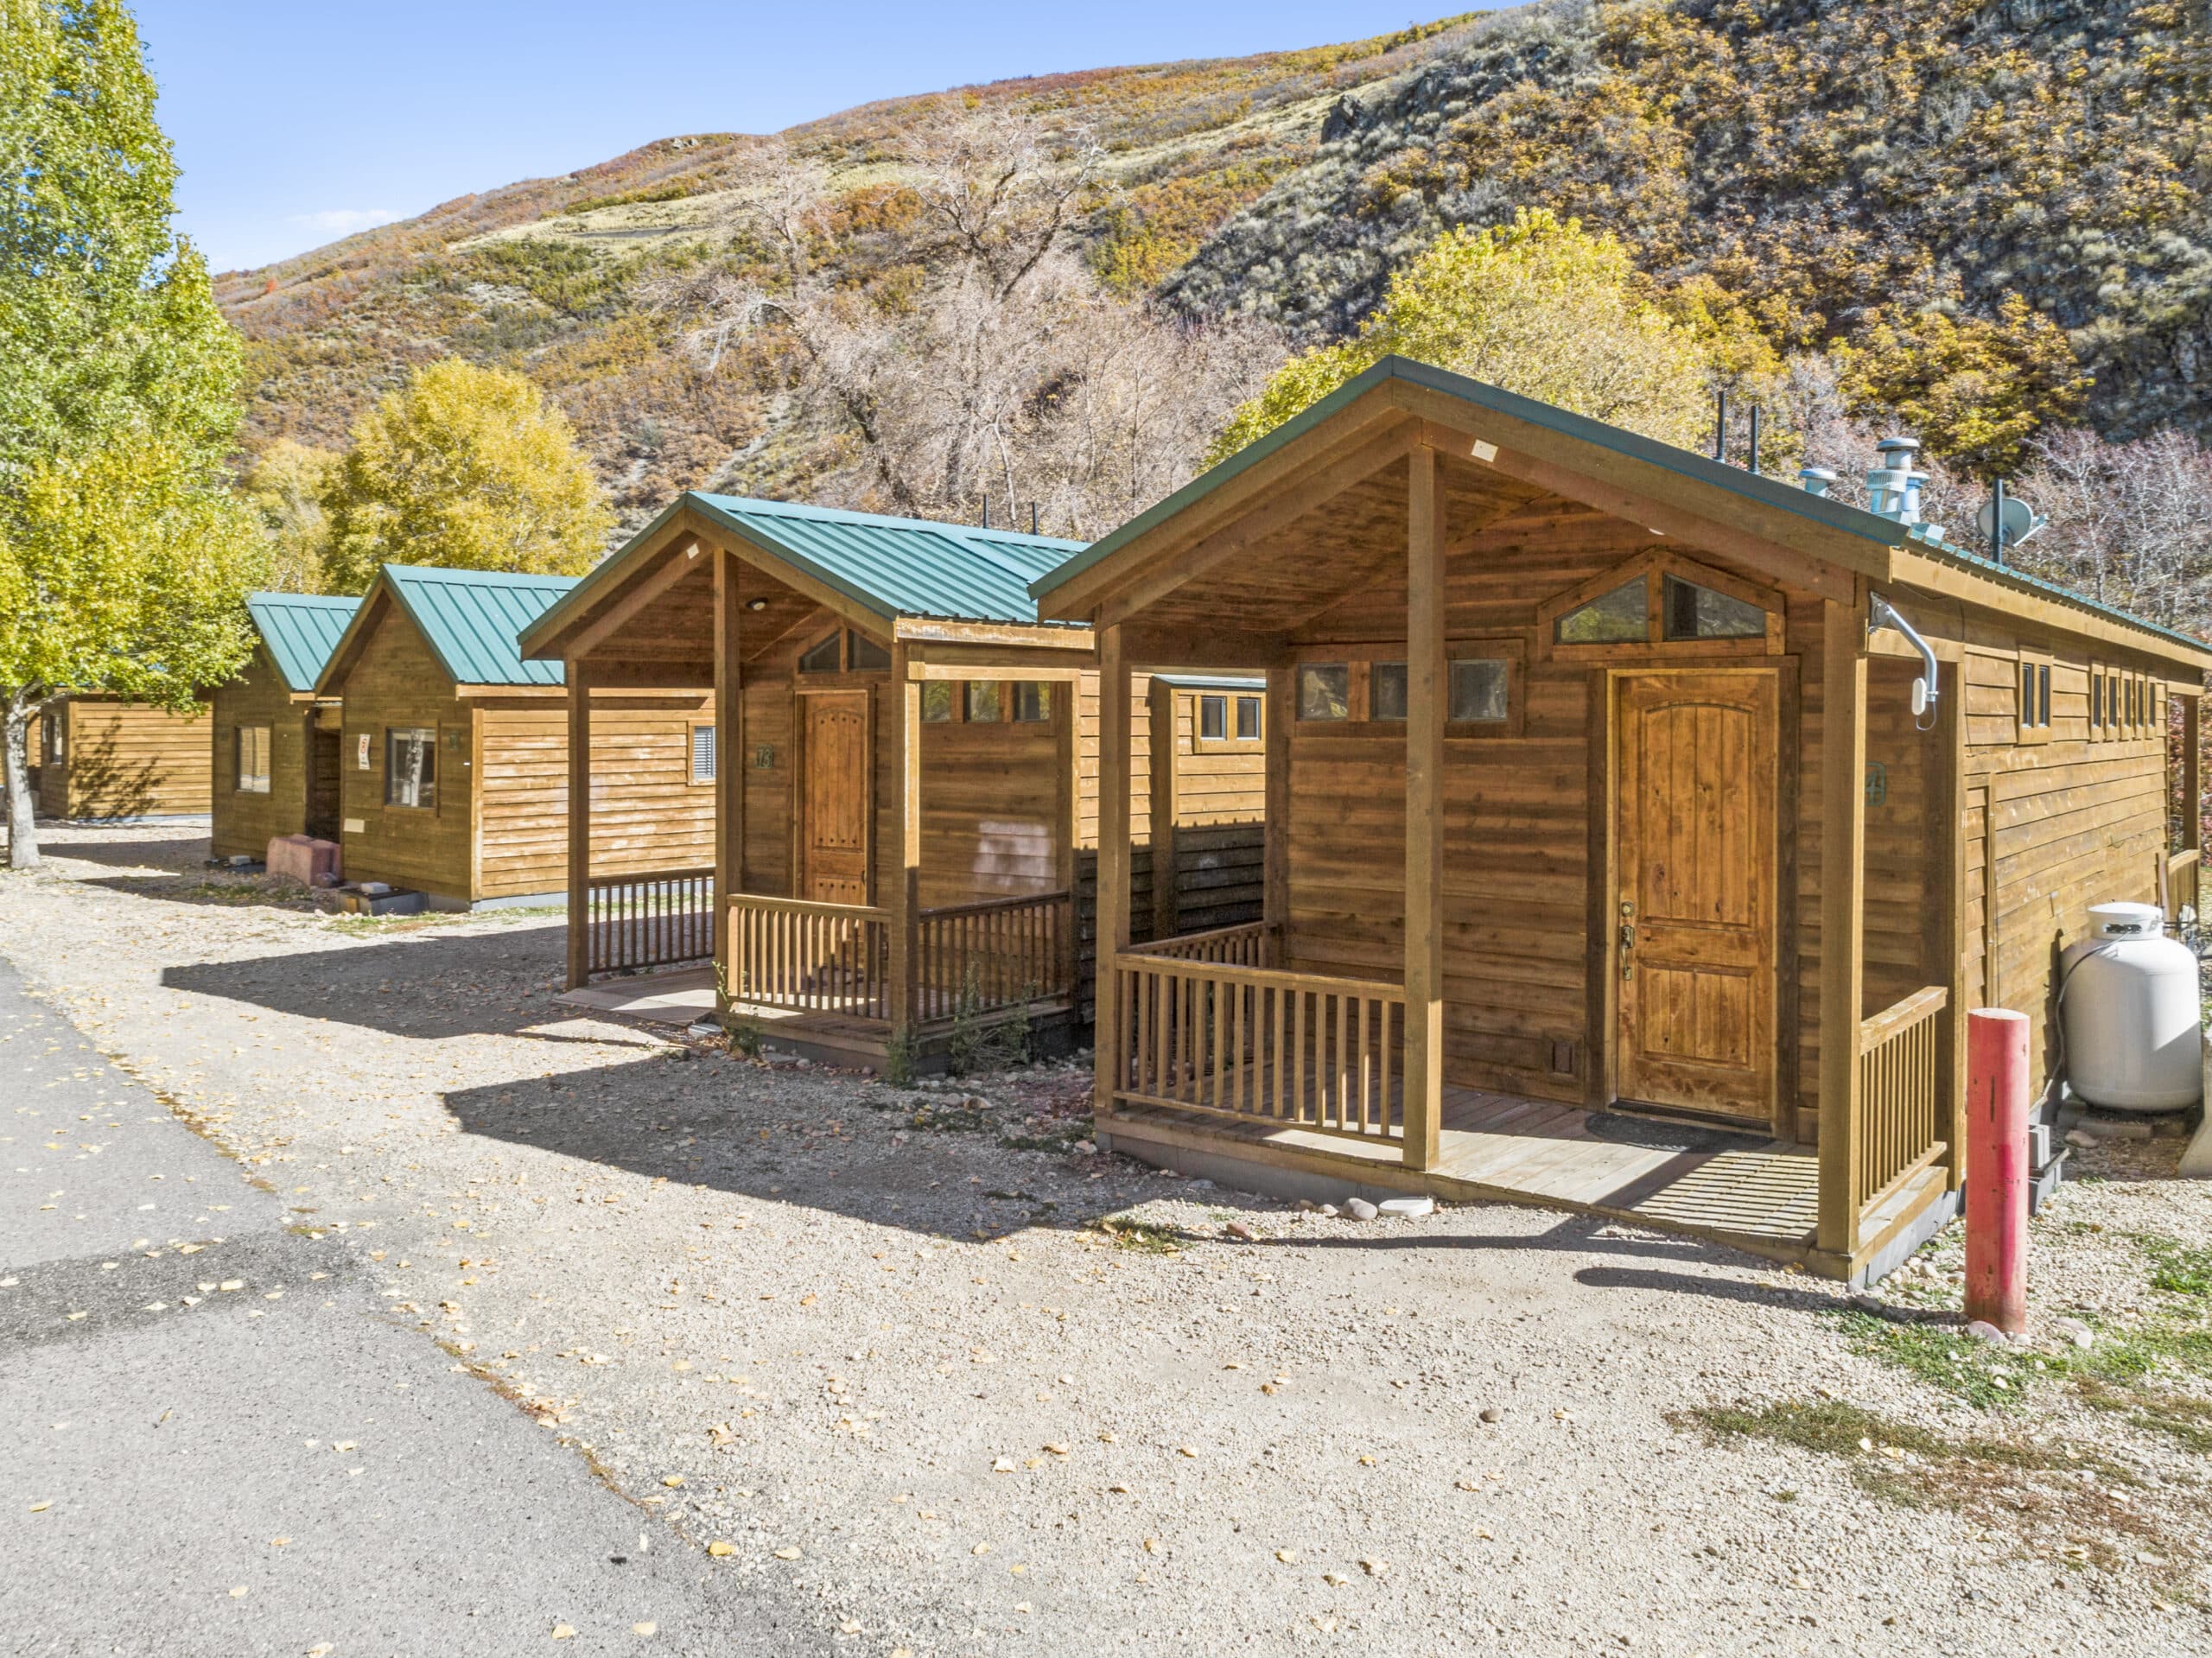 Row of cabins at the Rivers Edge campground near Heber Valley, UT